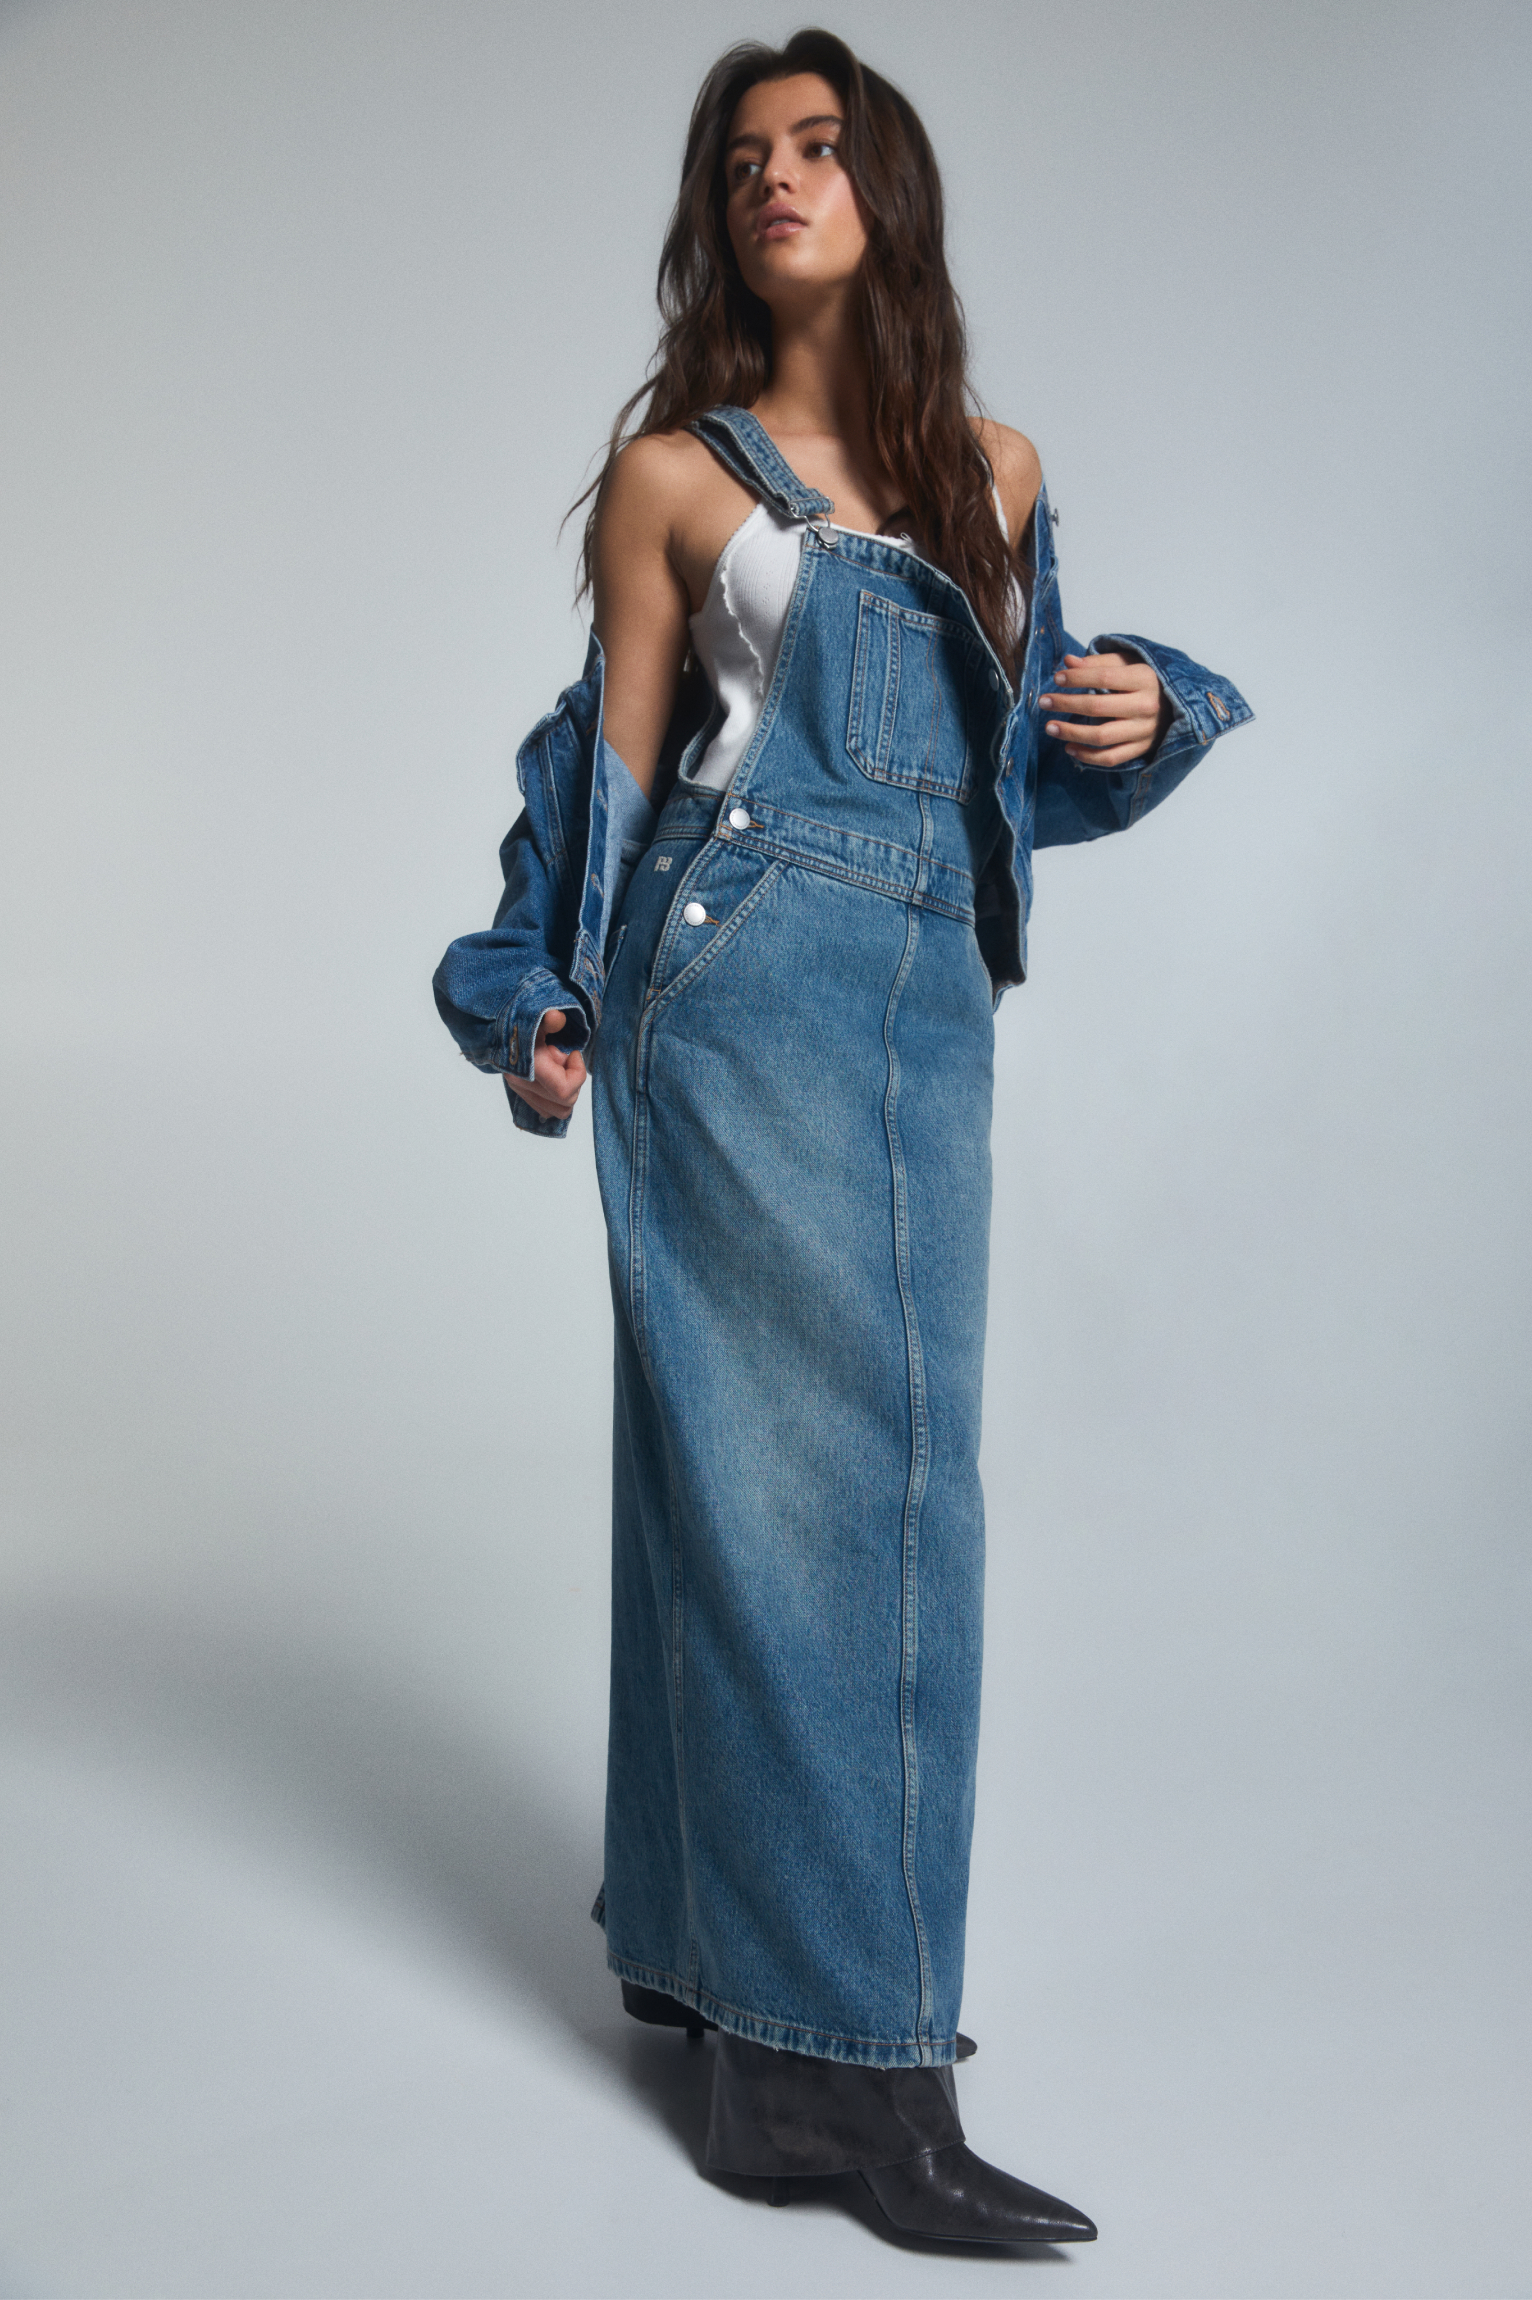 Buy Dungaree Skirt Made From Organic Denim, Dungaree Overalls Workwear Dress,  High-waisted Denim Mini Skirt, Women Casual Clothing for Summer Online in  India - Etsy